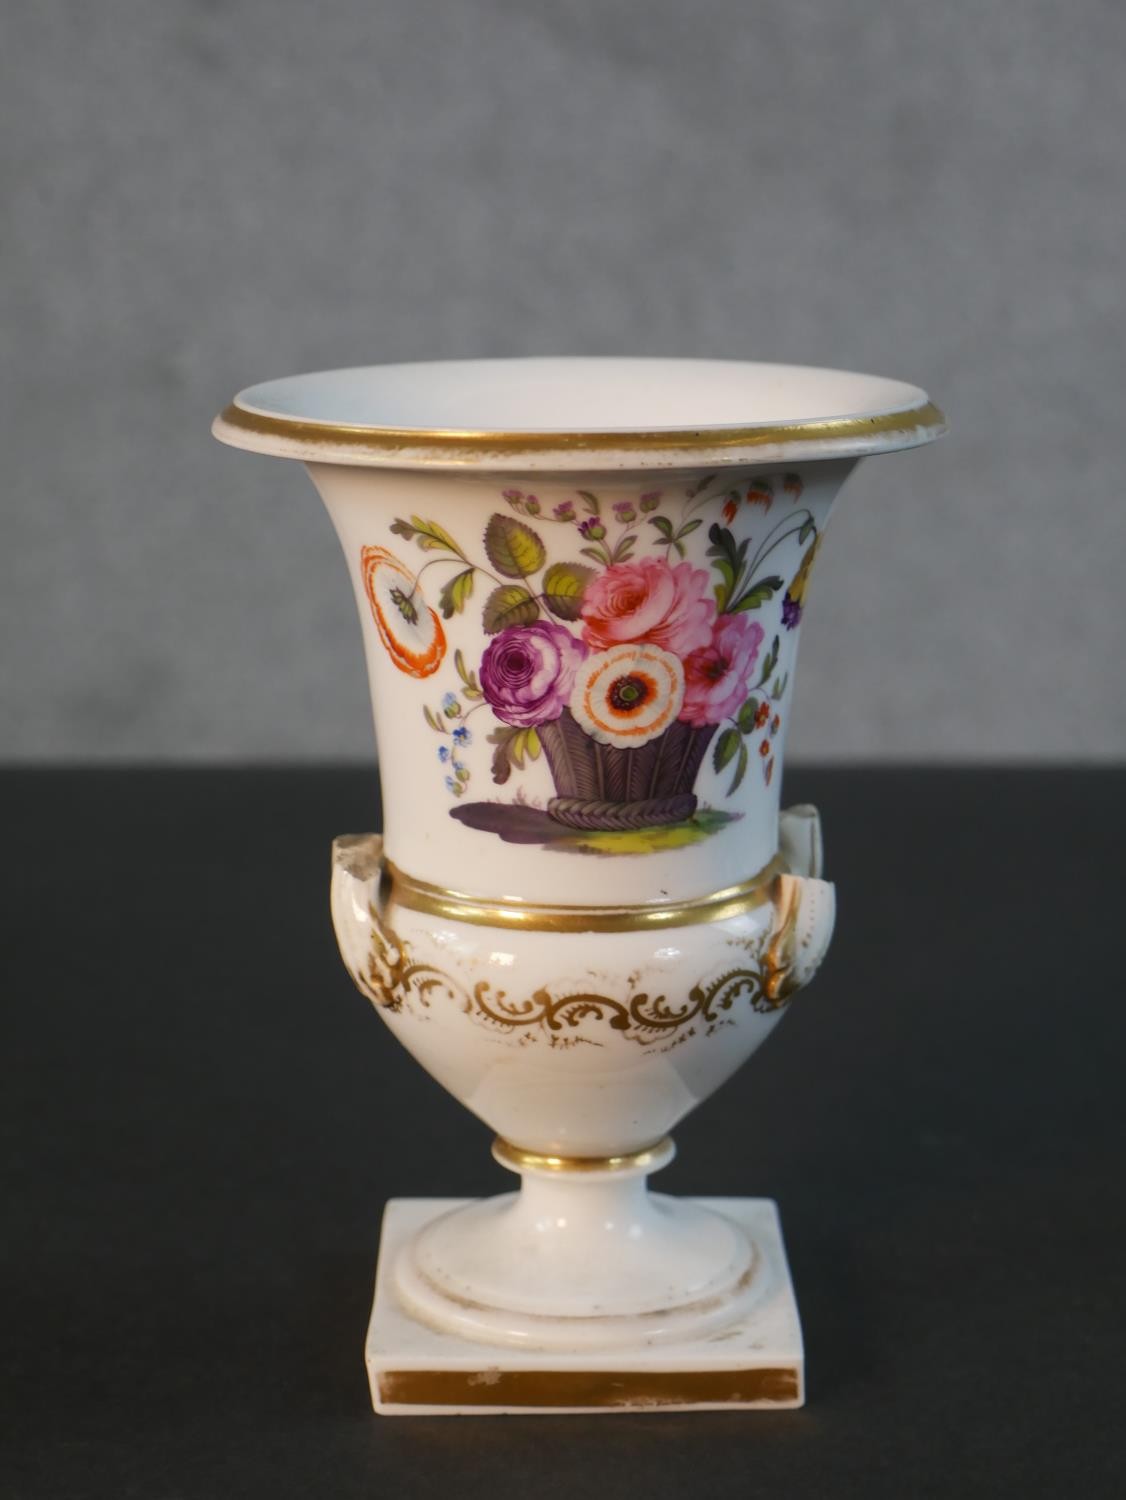 Three 19th century hand painted porcelain urns, one with gilded rams head handles and rose design ( - Image 6 of 6